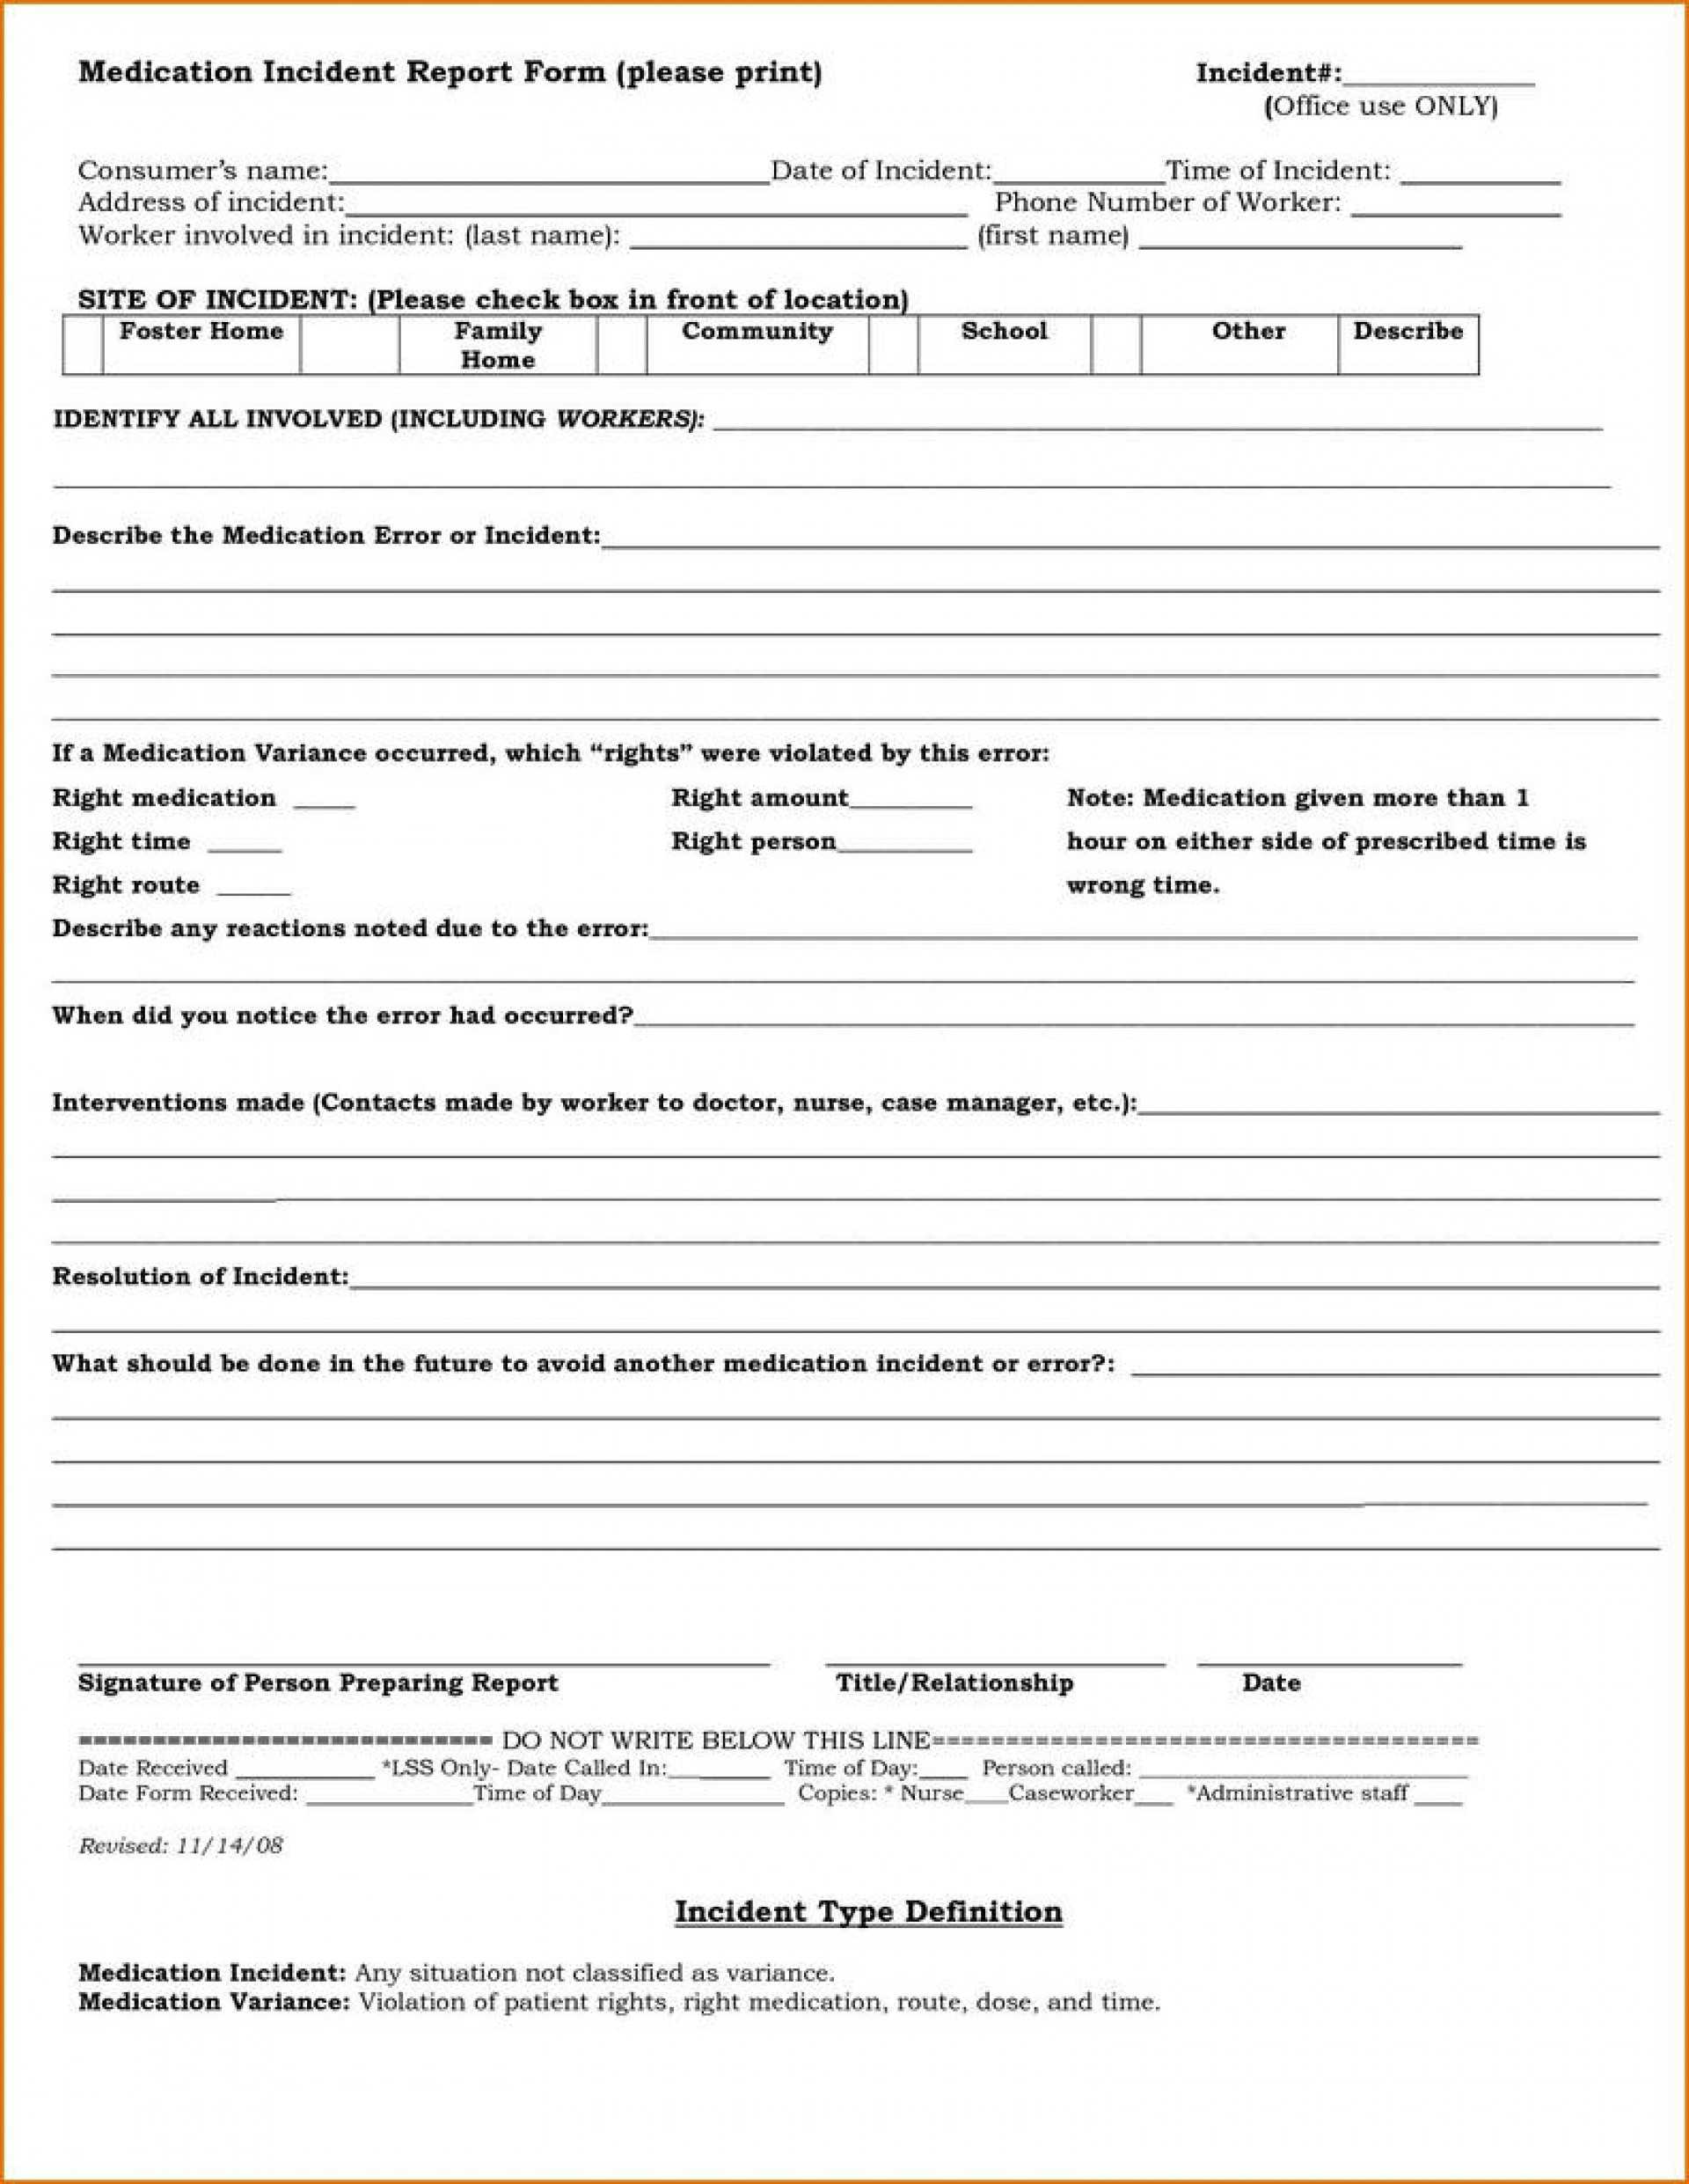 036 Medication Release Form Template Medical Forms Ideas Pertaining To Medication Incident Report Form Template